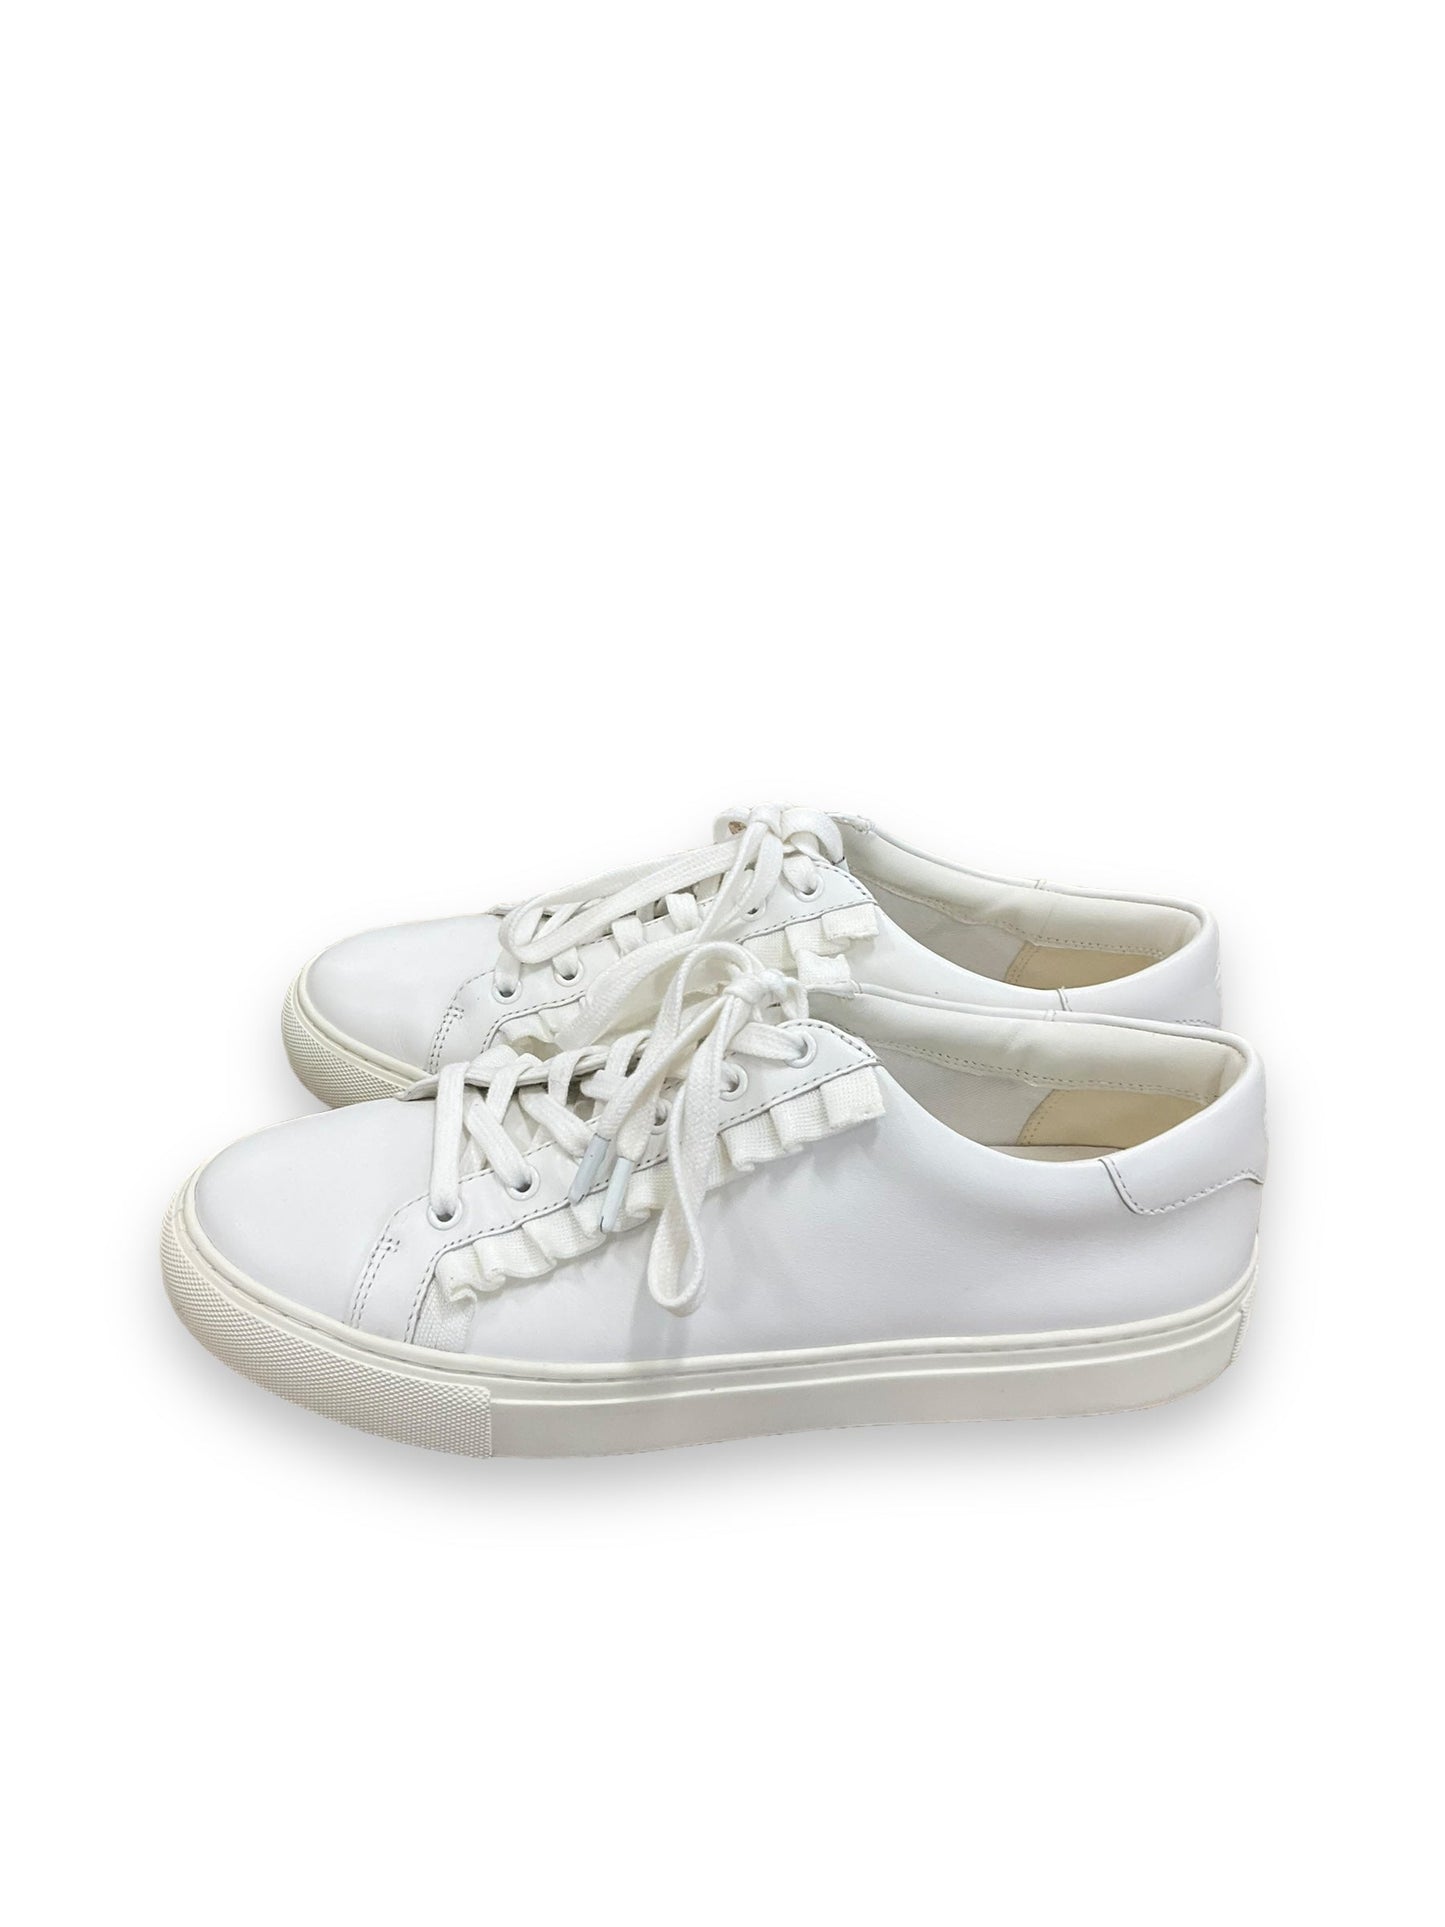 White Shoes Designer Tory Burch, Size 9.5